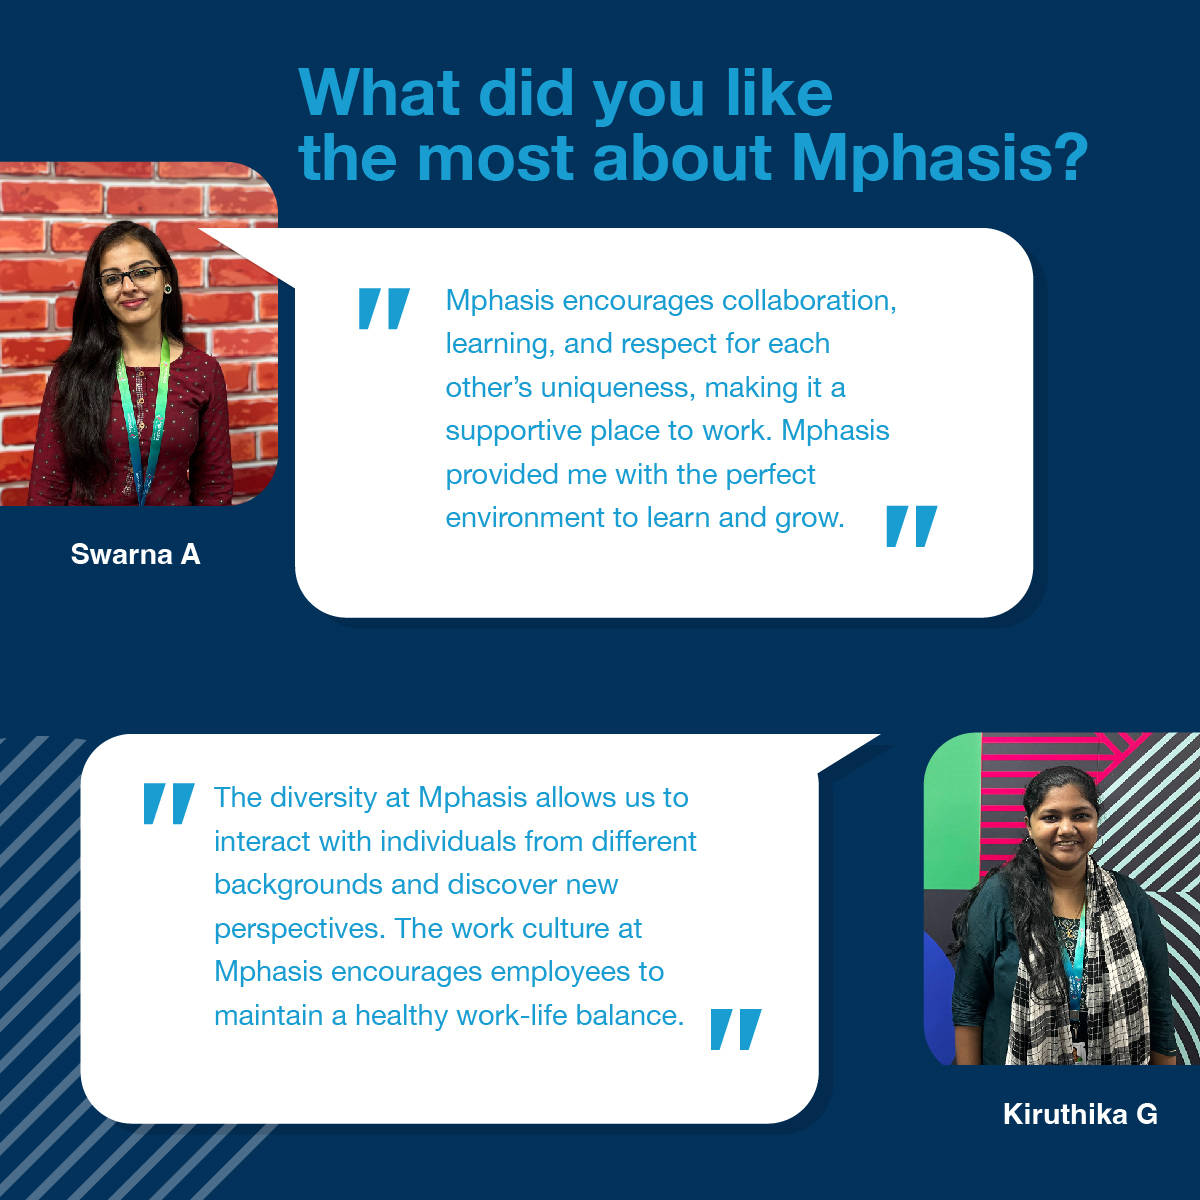 Kiruthika and Swarna's internship at Mphasis was rewarding for both them and us. Their fresh perspectives and enthusiasm made them a pleasure to work with. We're confident their time at Mphasis equipped them with significant takeaways for their future careers in the industry.